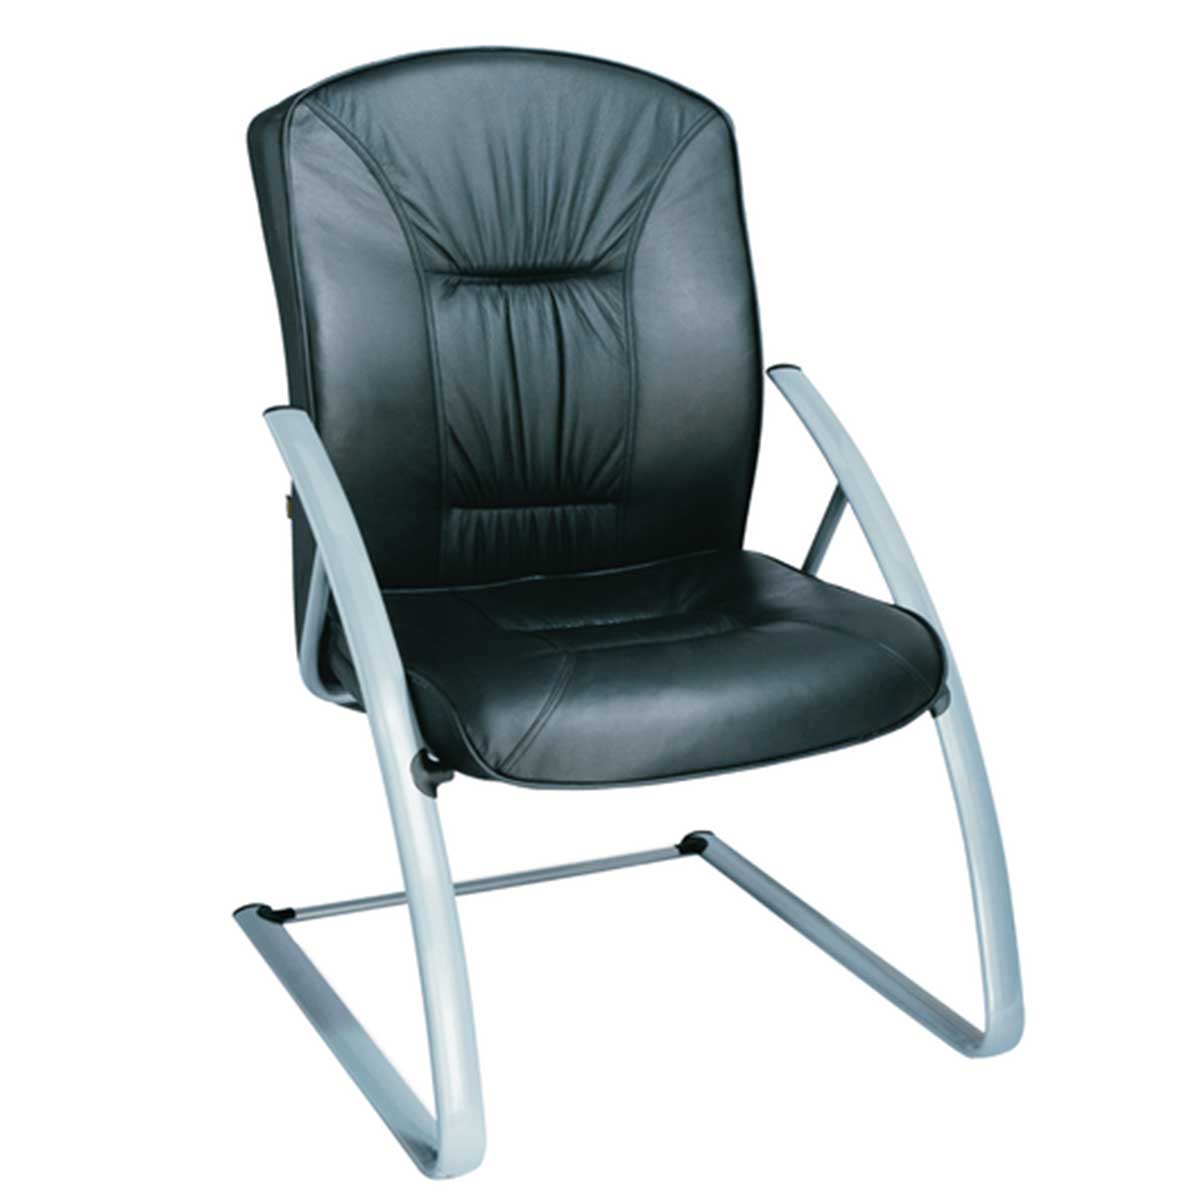 Leather office chair Manufacturers, Suppliers in Pushp Vihar